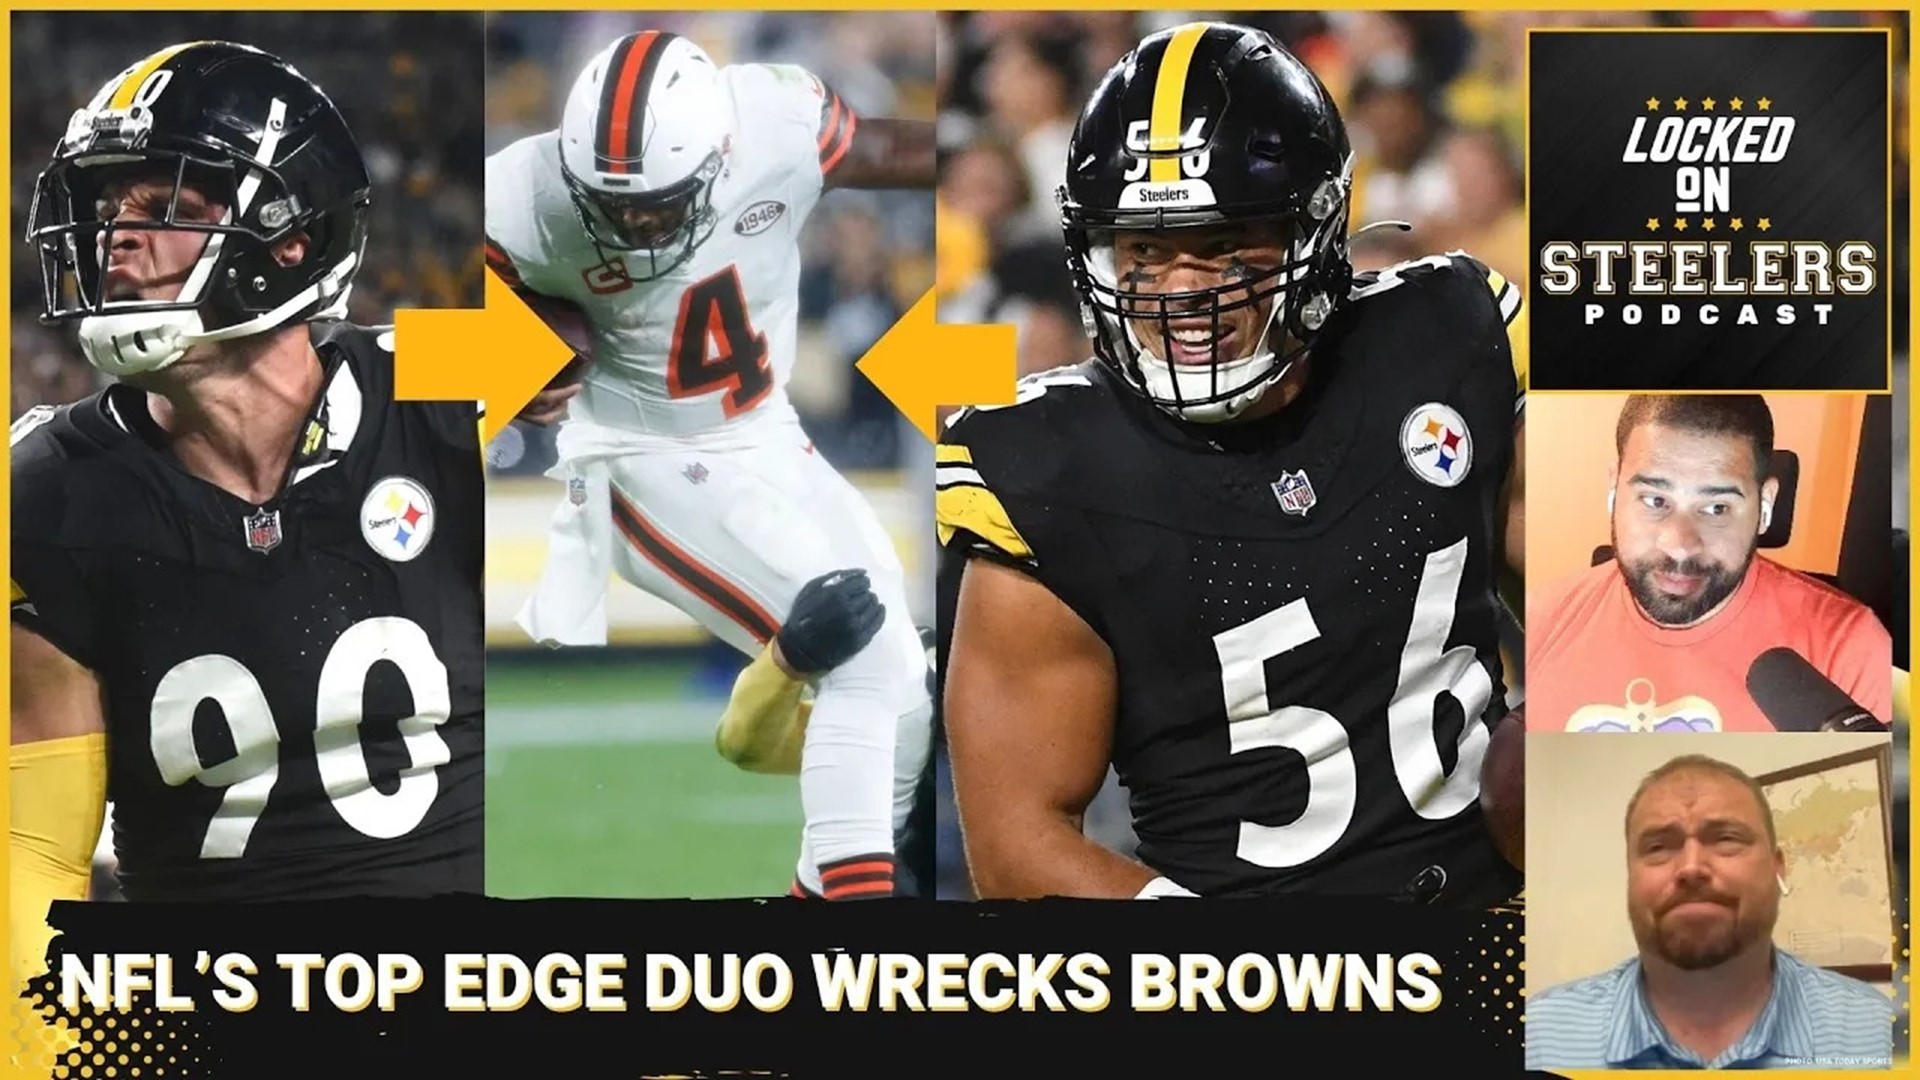 The Pittsburgh Steelers beat the Cleveland Browns 26-22 Monday night.